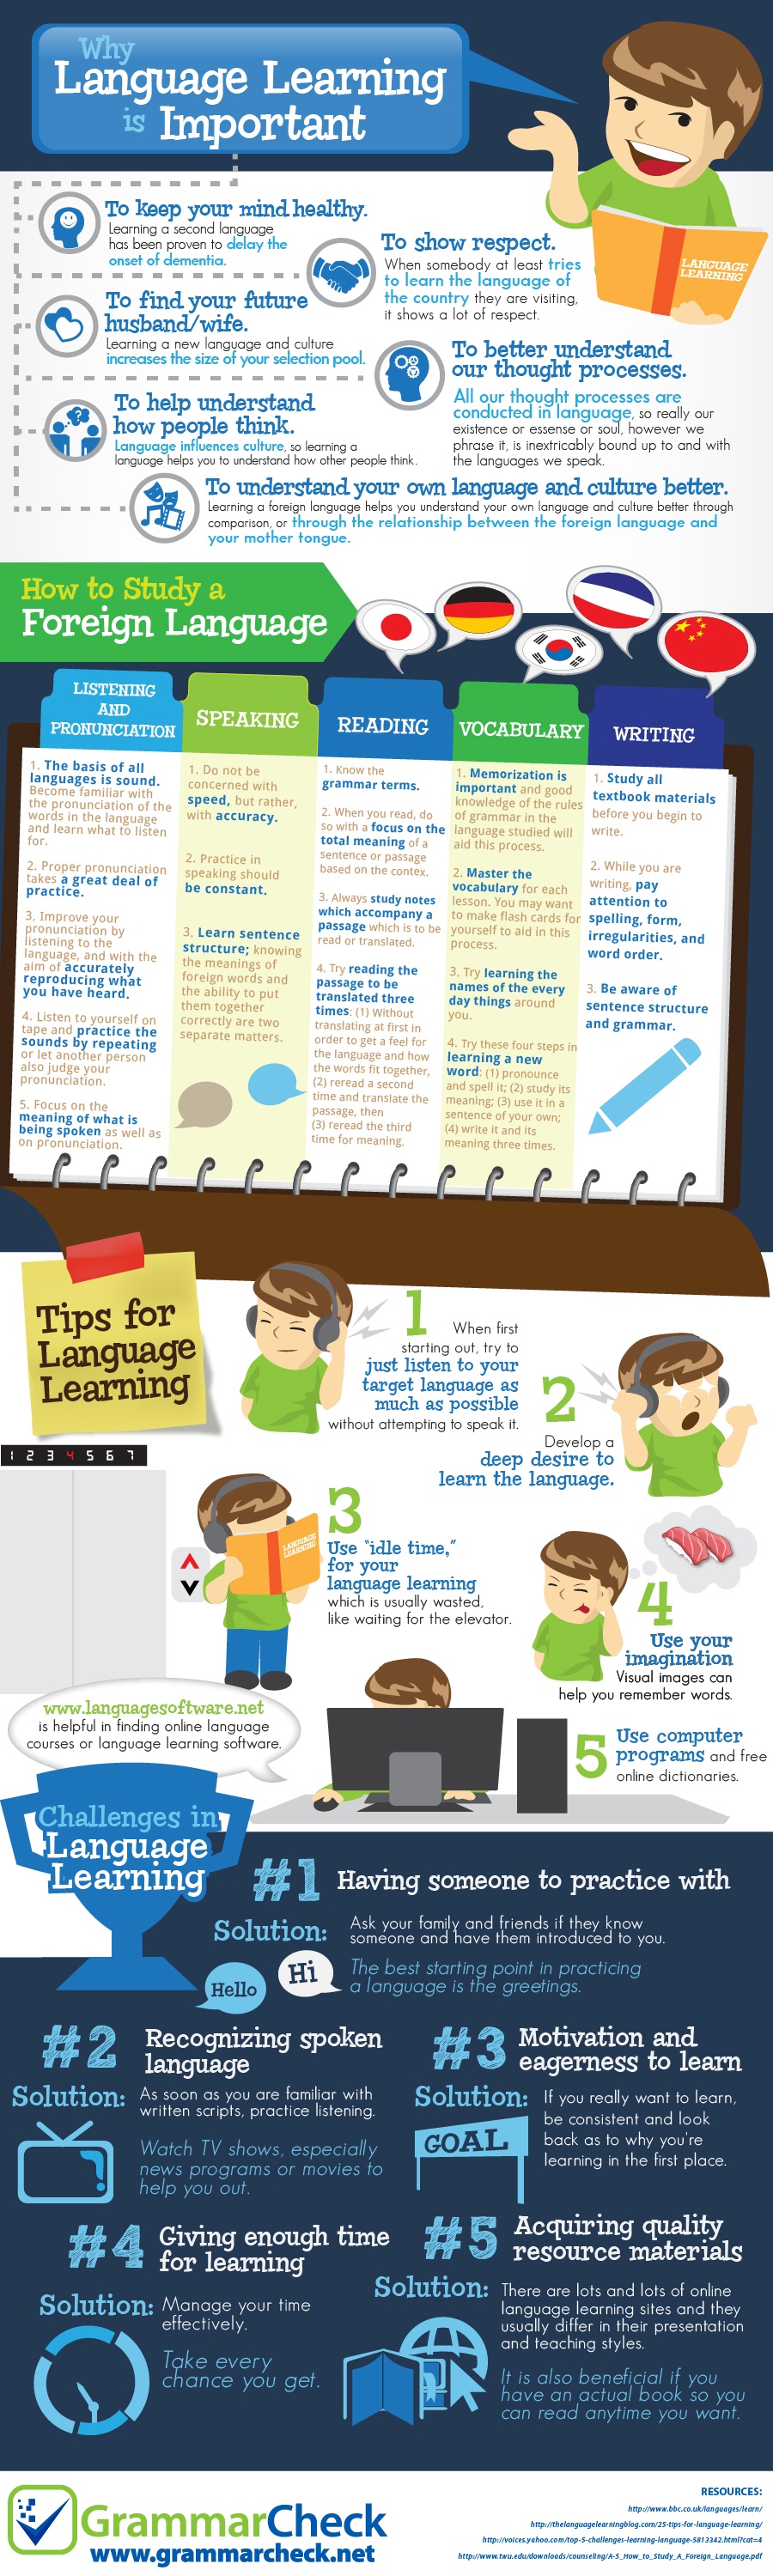 Why-Language-Learning-is-Important-Infographic